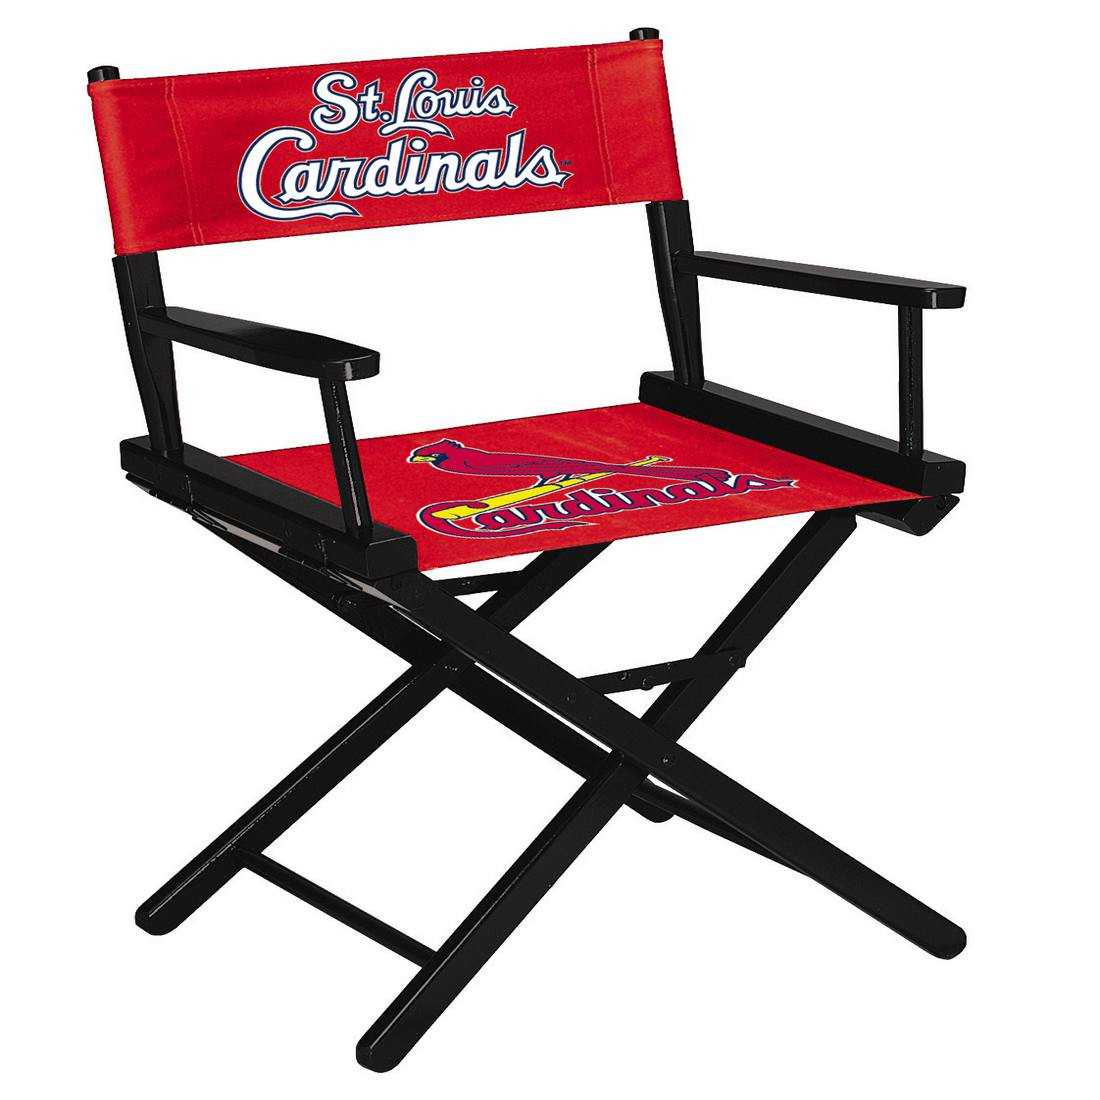 ST LOUIS CARDINALS TABLE HEIGHT DIRECTORS CHAIR